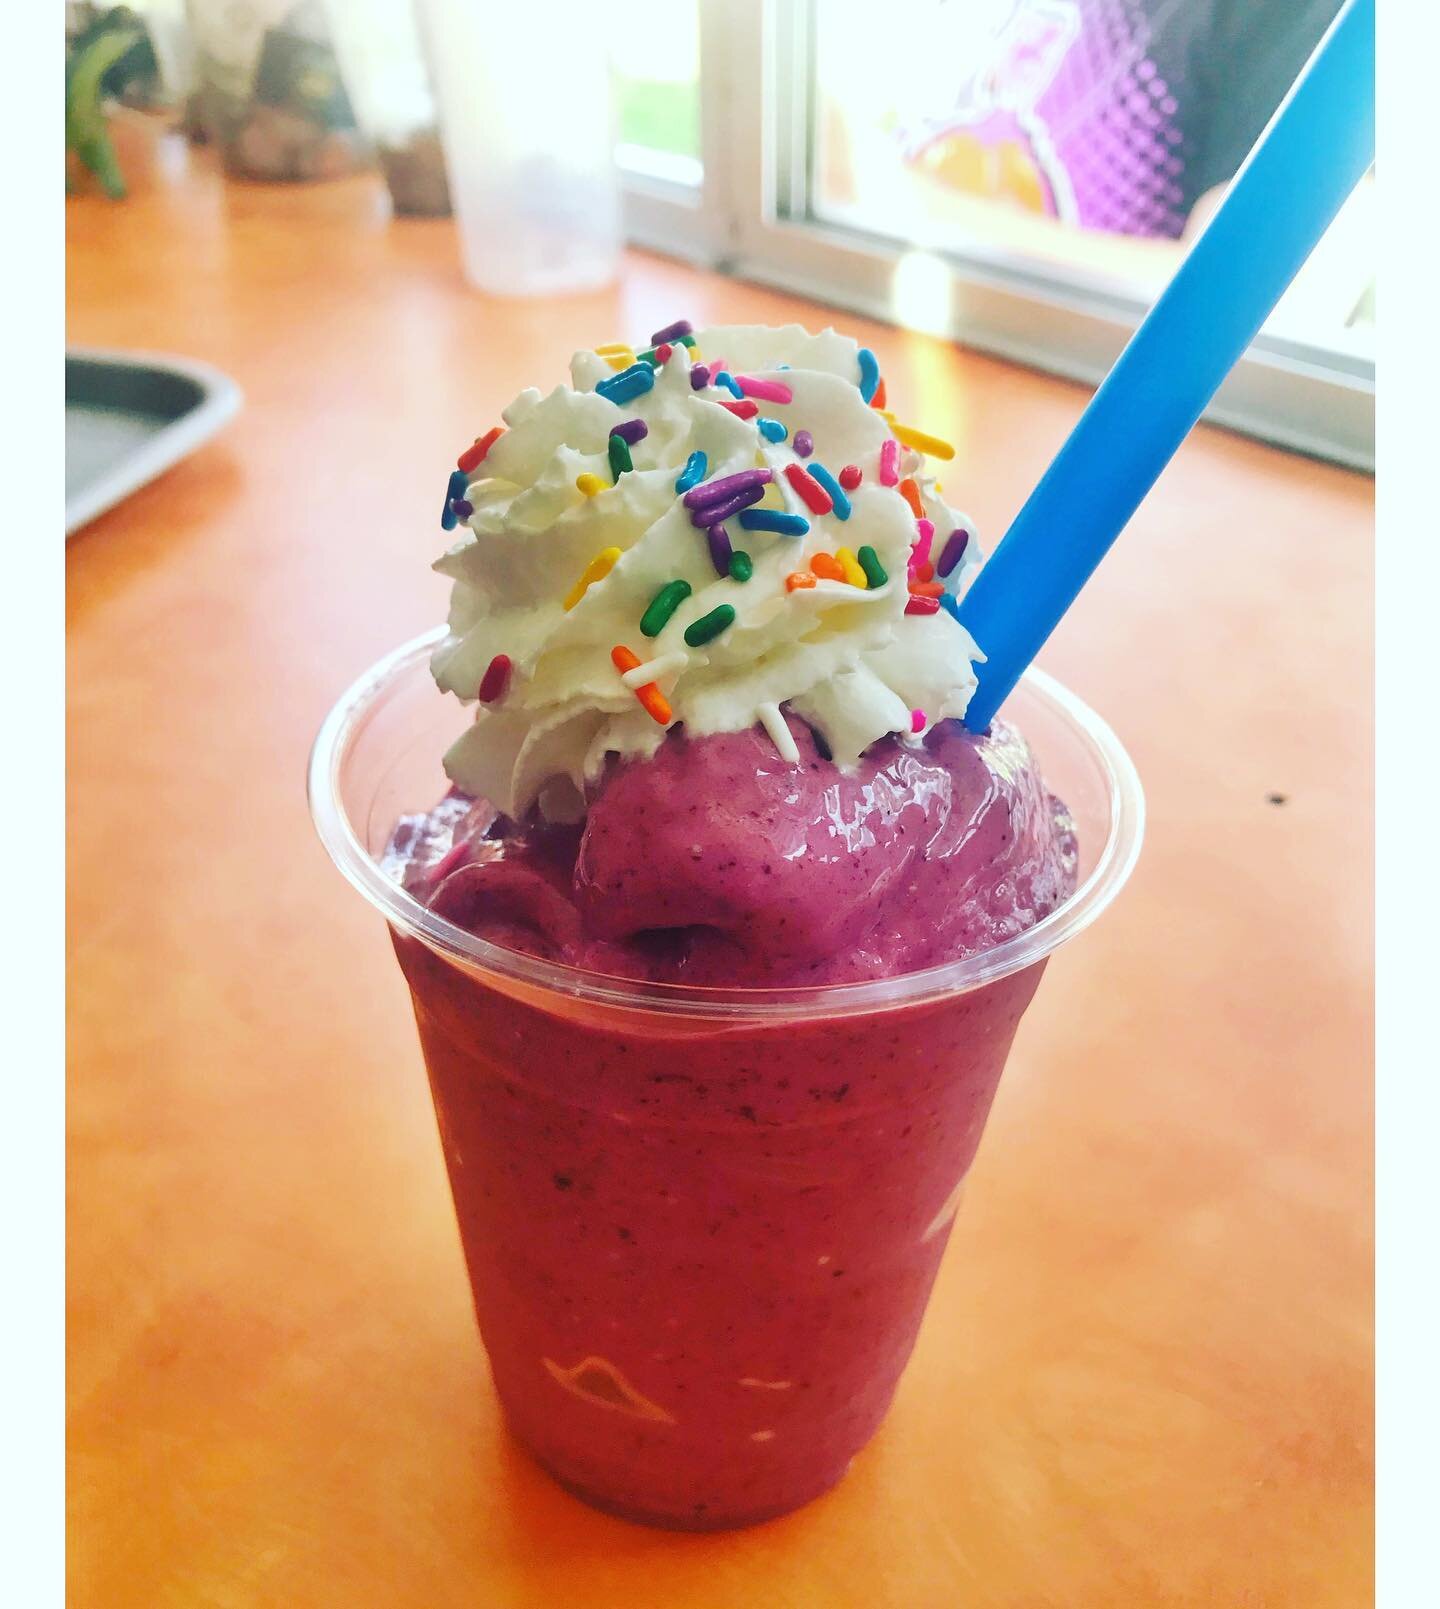 Just gonna leave this here ... 
Berry Strong w/ jimmies ftw!!!
👩&zwj;🎤🌈🦄
Beautyfull weekend ahead, GET SOME ;)
🤙🚐💨
#farmersmarket #foodtruck #shake #smoothie #shoreshake